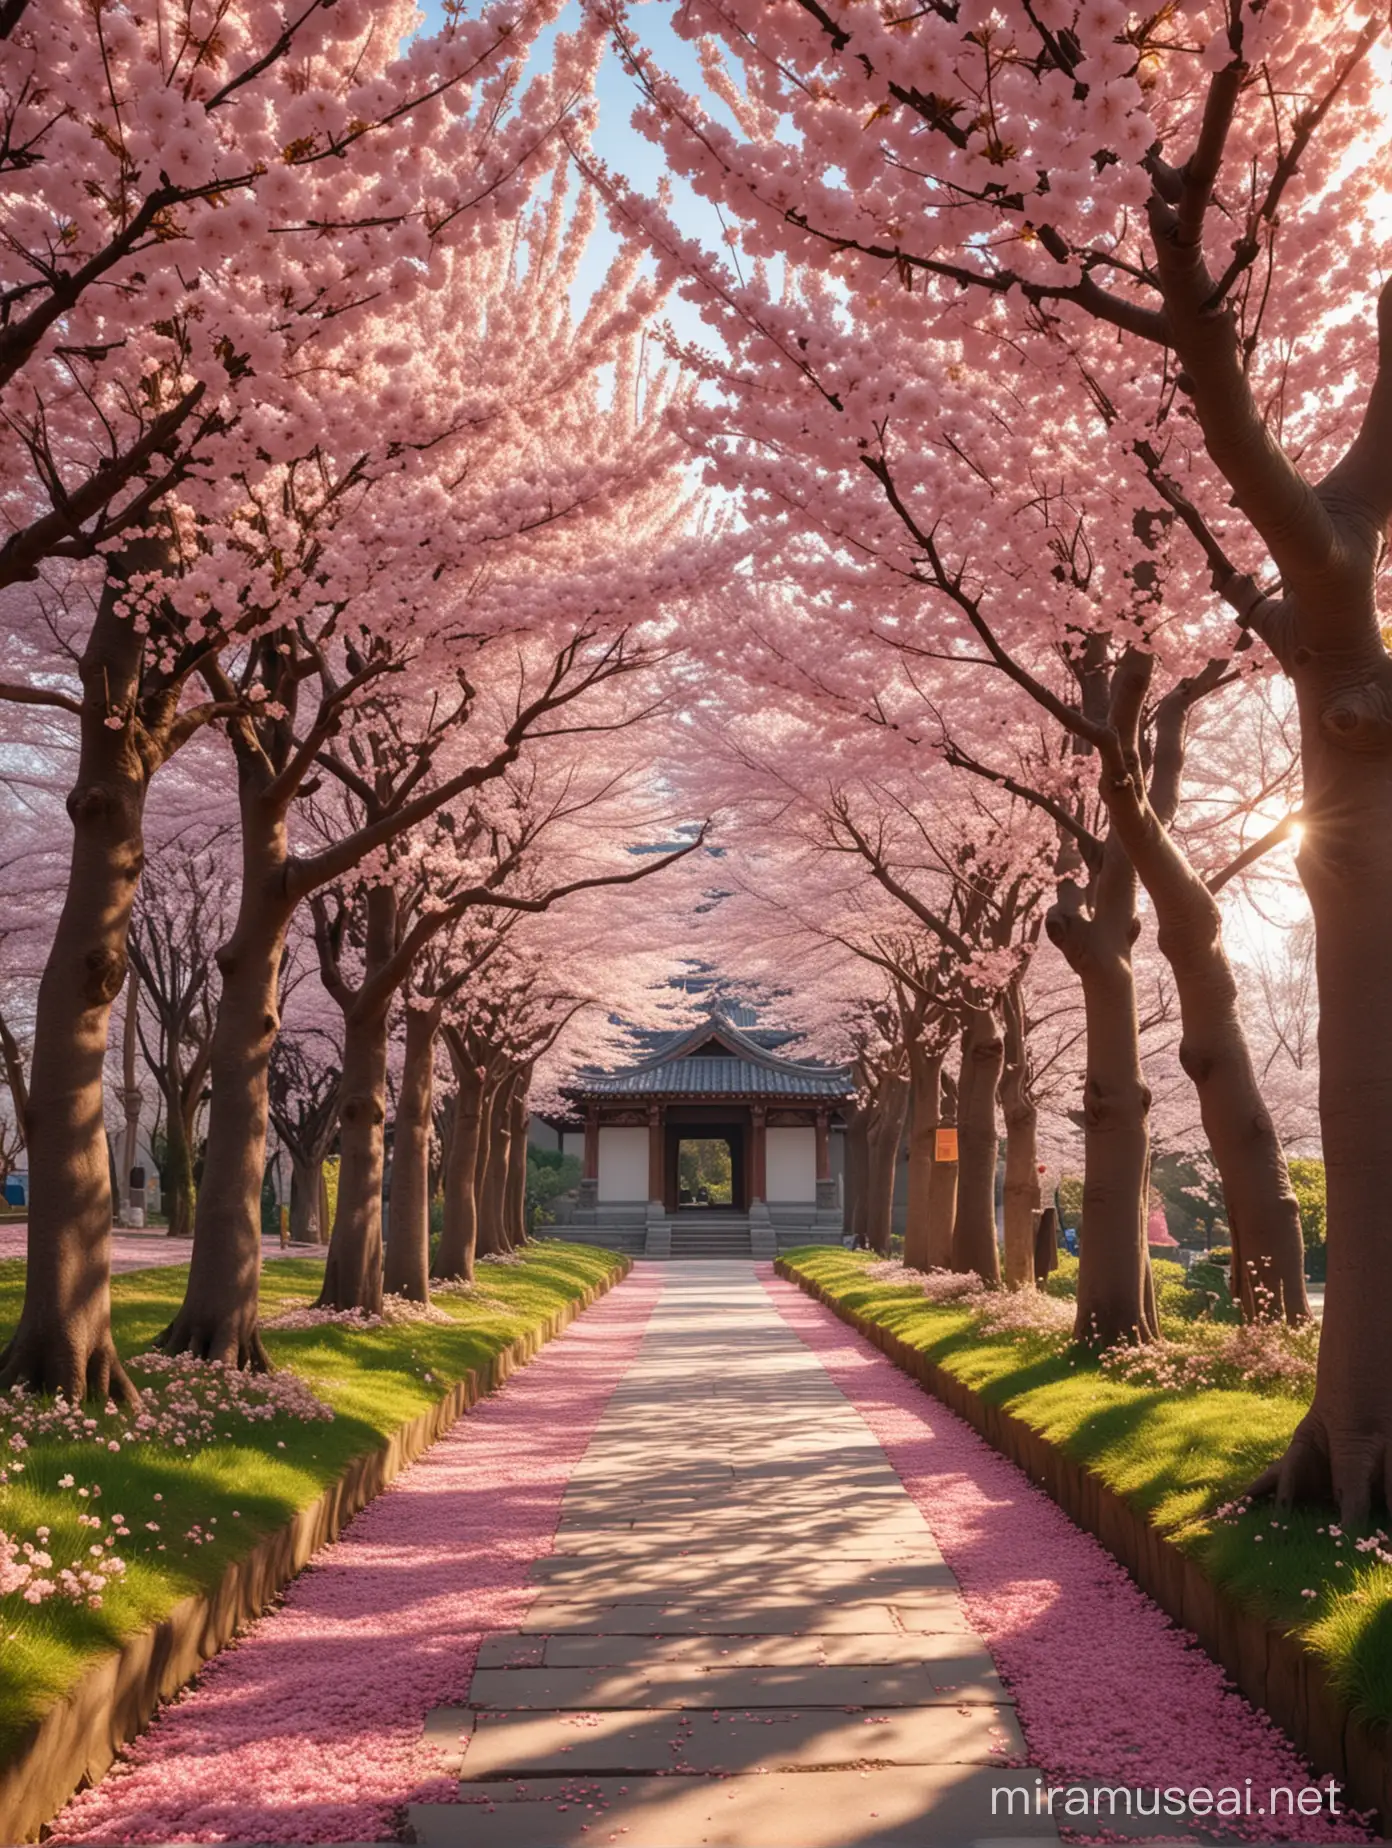 A breathtakingly beautiful real-life photograph of a small Temple trail lined with bloomed cherry blossom trees, the plenty of cherry blossom petals, sunlight filtering through the petals creating a serene and magical atmosphere, masterpiece,best quality, highres, 8K photograph, Nikon